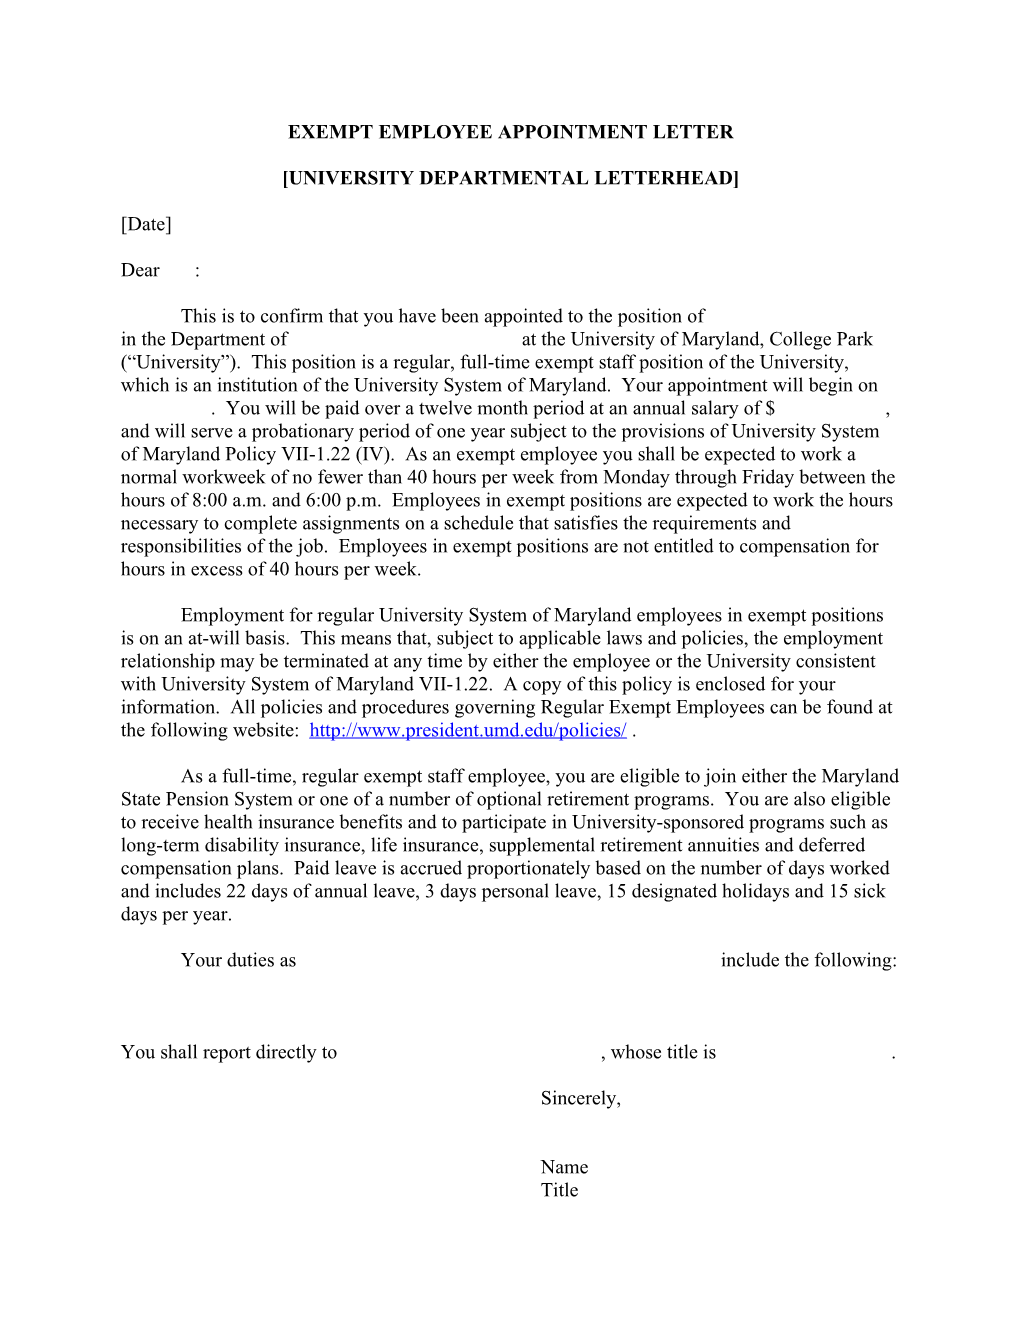 Exempt Employee Appointment Letter